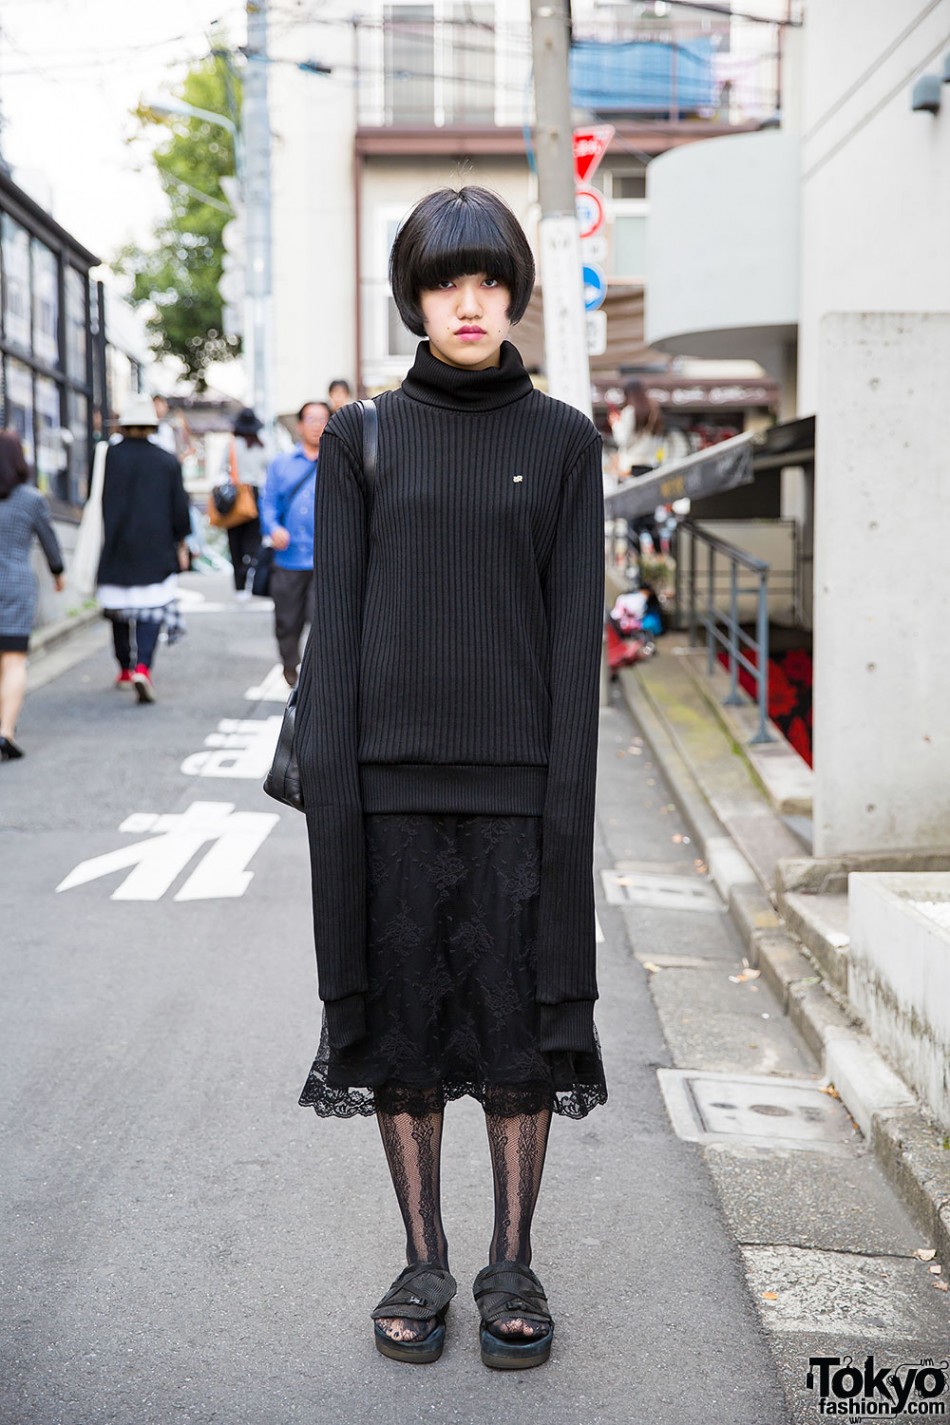 Harajuku Girl in All Black w/ Extra Long Sleeve 99% IS Turtleneck ...